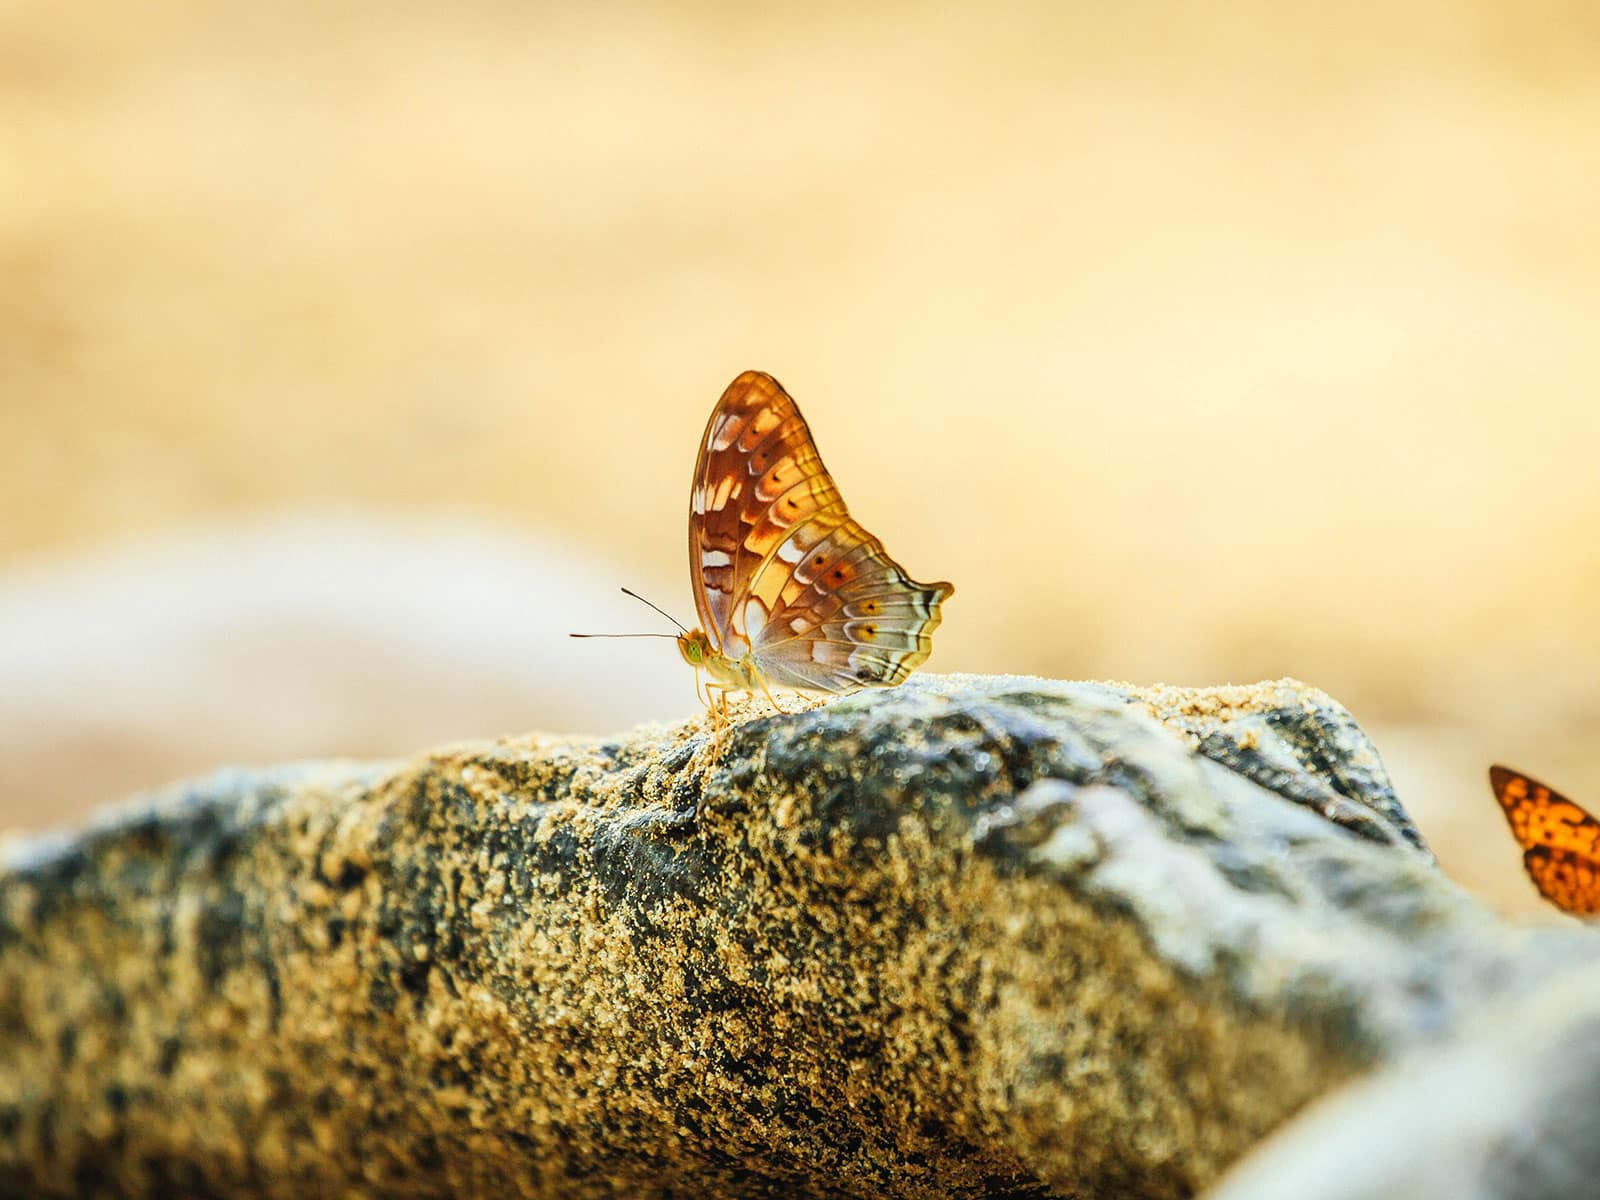 A brown and orange butterfly basking on a hot rock in the sun